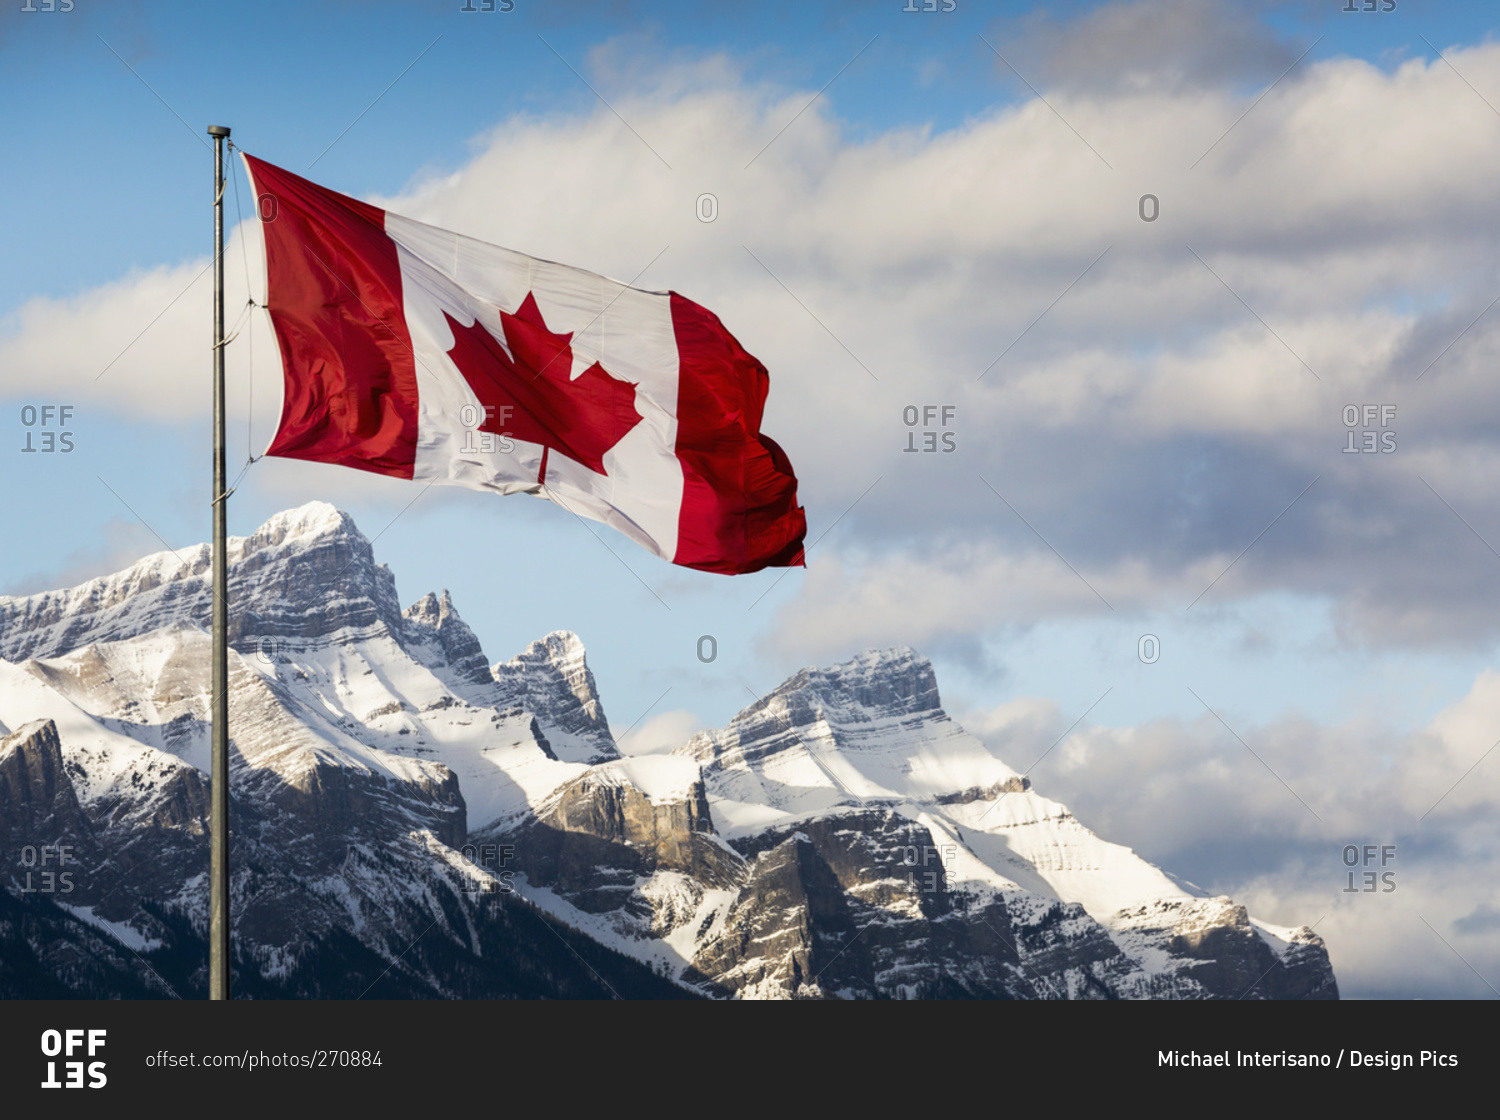 Canadian flag blowing in the wind on a flag pole with snow covered mountain range in the background with blue sky and clouds, Canmore, Alberta, Canada